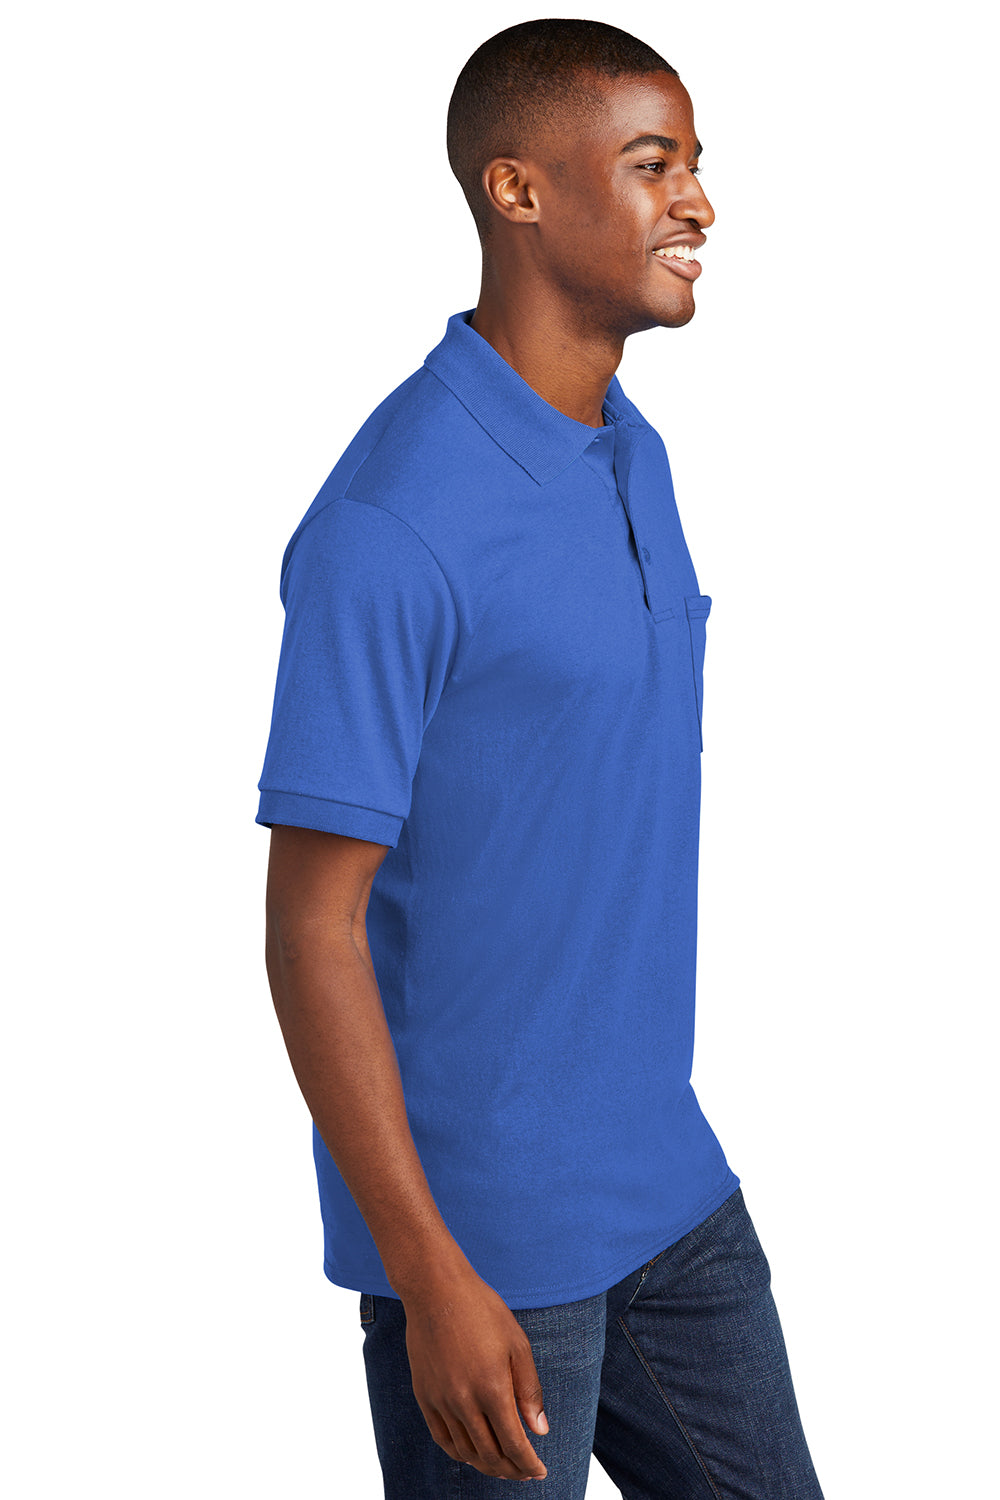 Port & Company KP55P Mens Core Stain Resistant Short Sleeve Polo Shirt w/ Pocket Royal Blue Side